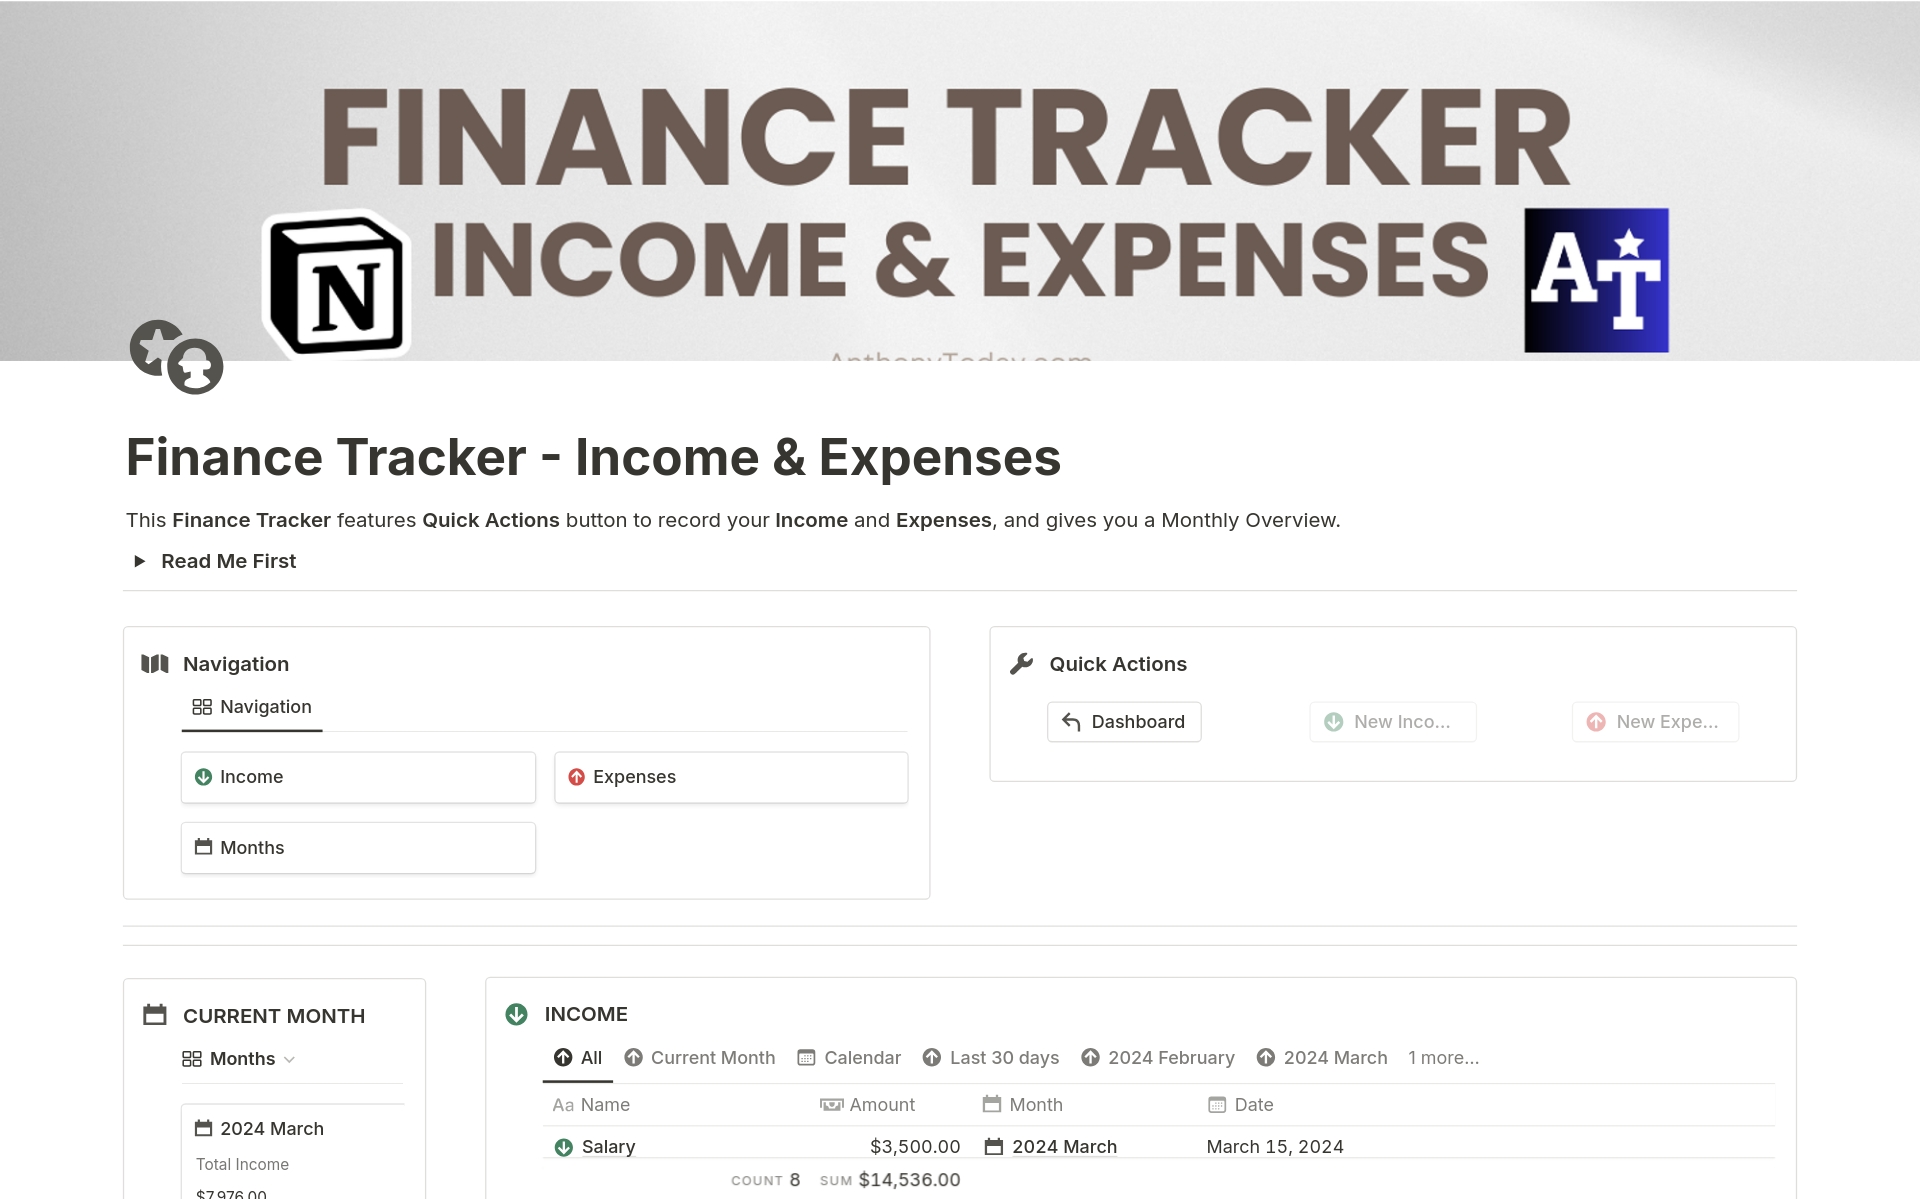 Finance Tracker - Income and Expensesのテンプレートのプレビュー